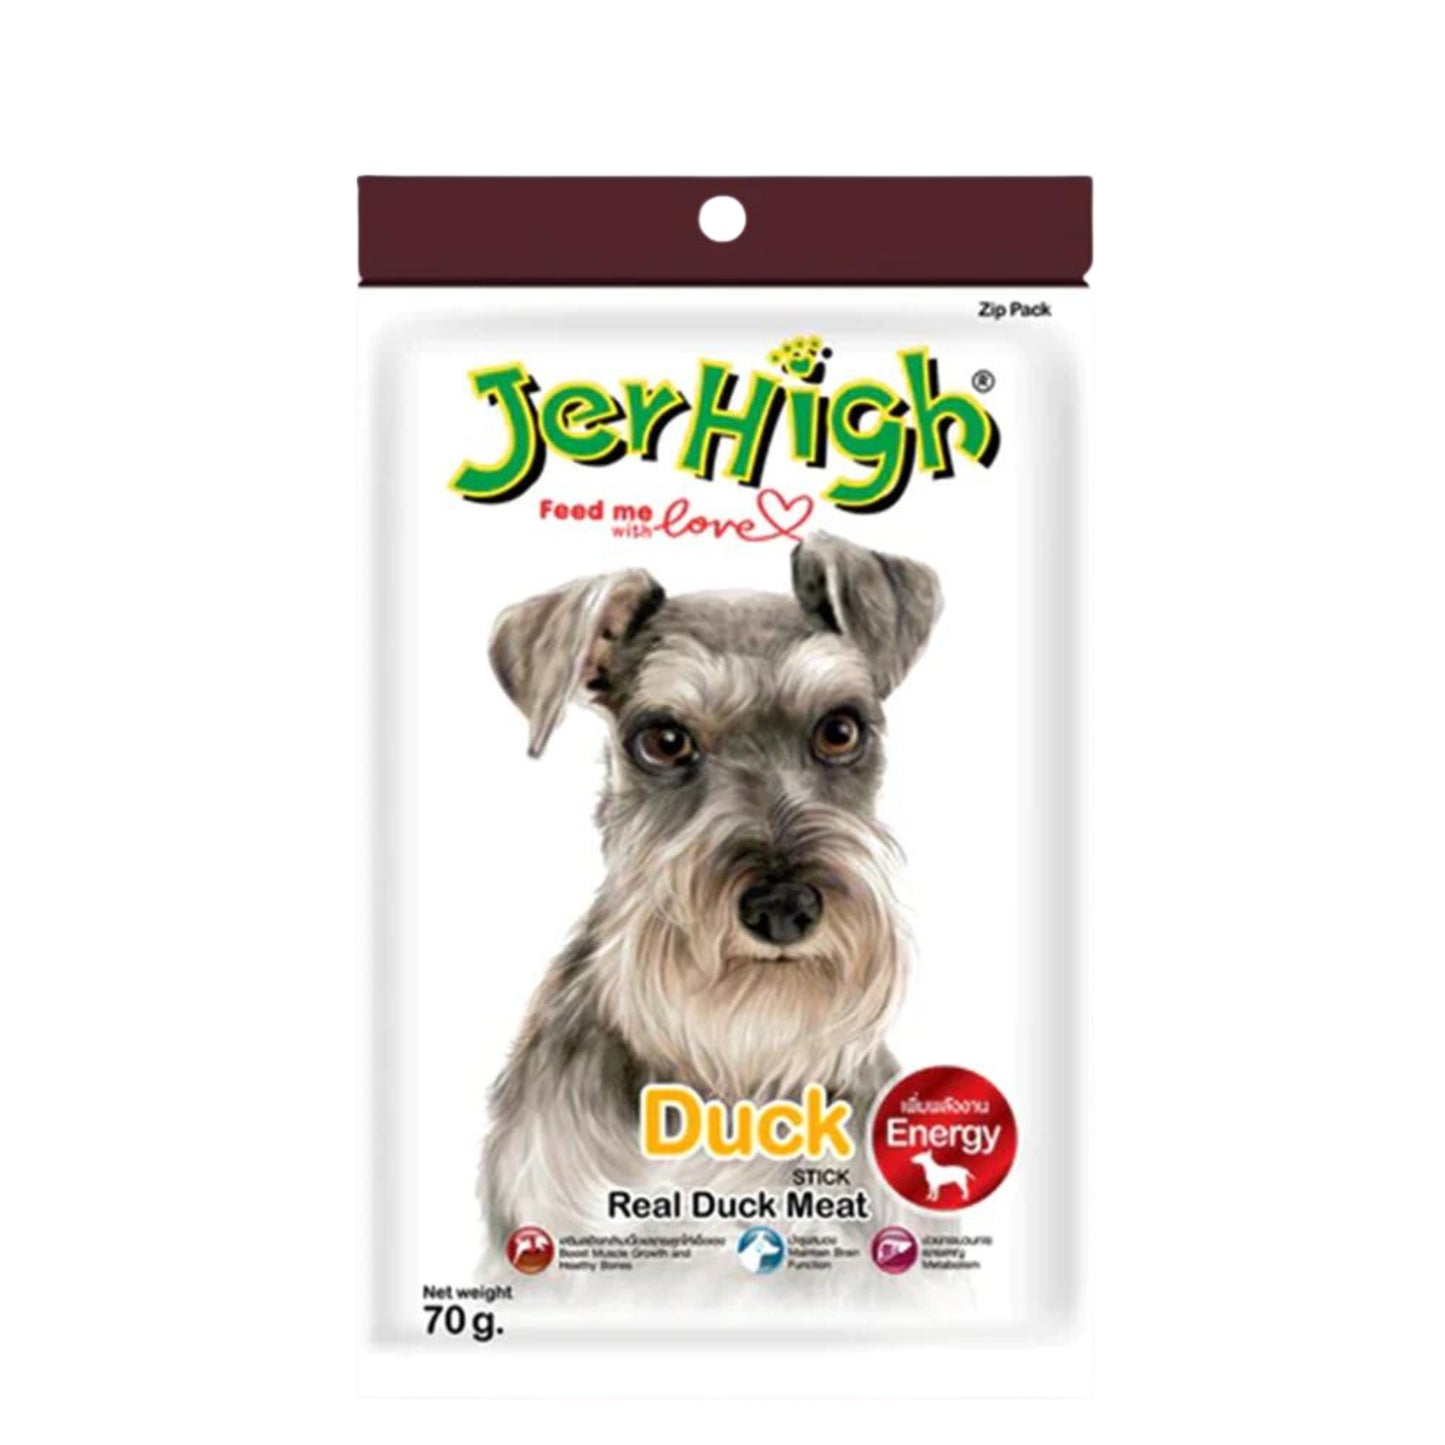 JerHigh Duck Stick Dog Treat with Real Chicken Meat - 70gm